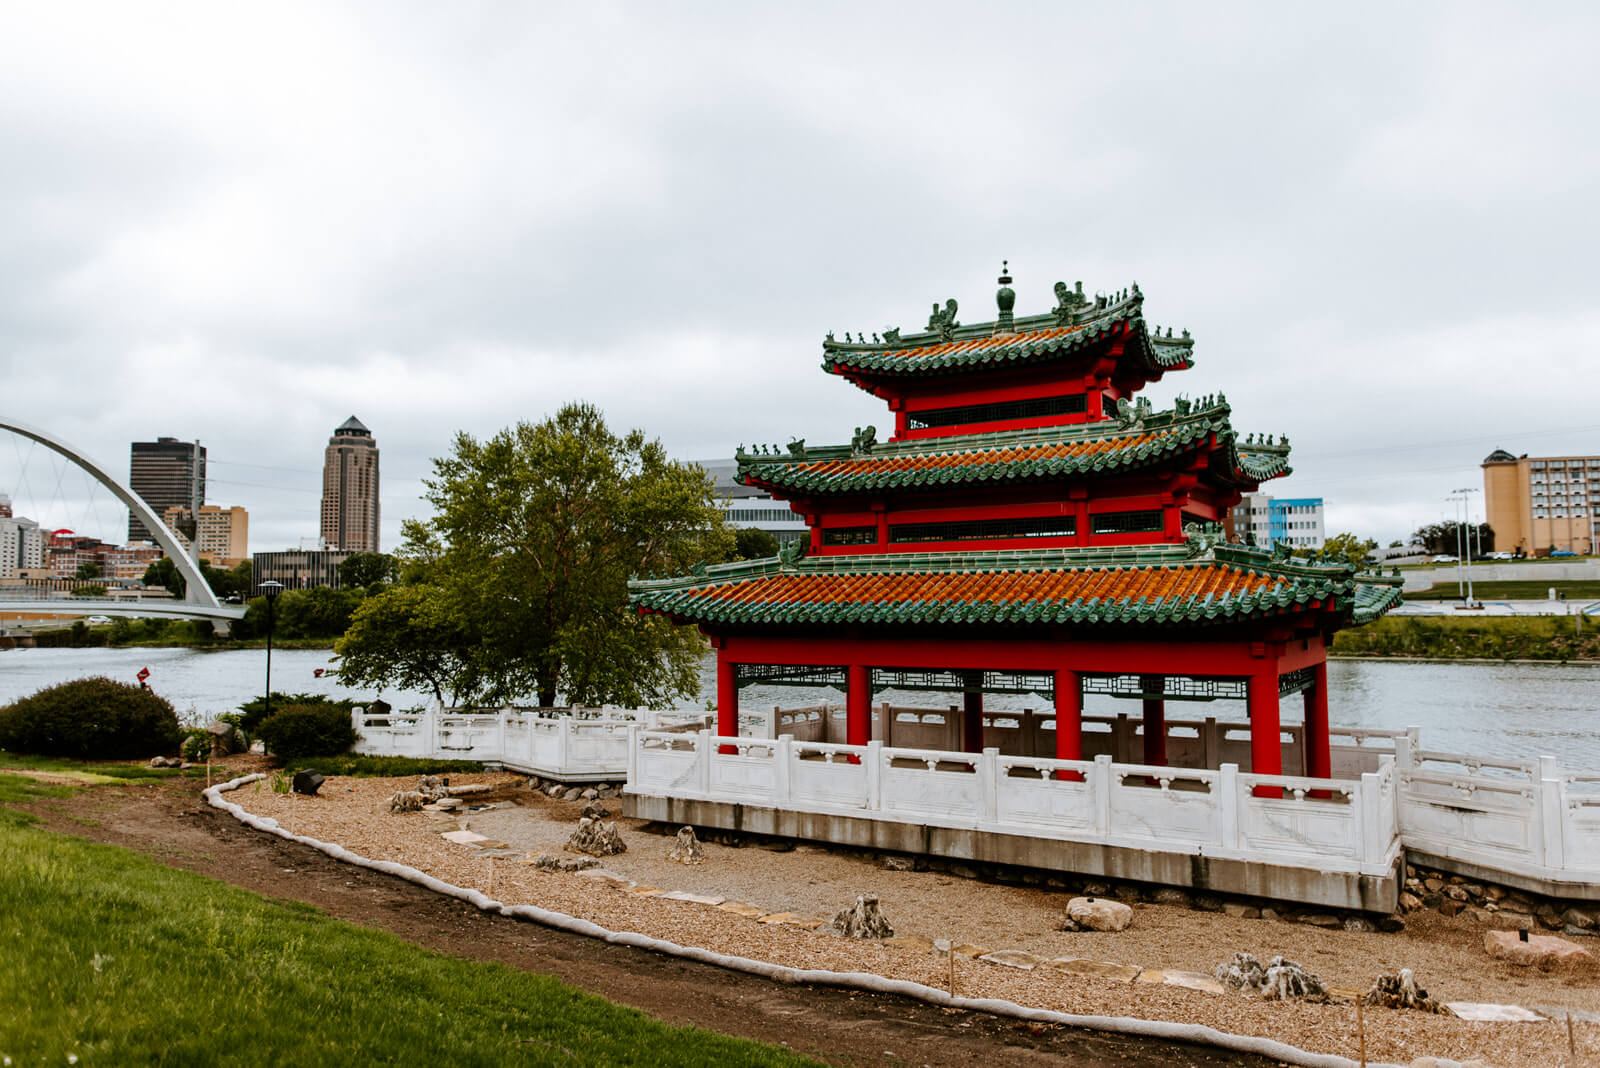 Red Asian Pavilion with a river and city skyline behind it.